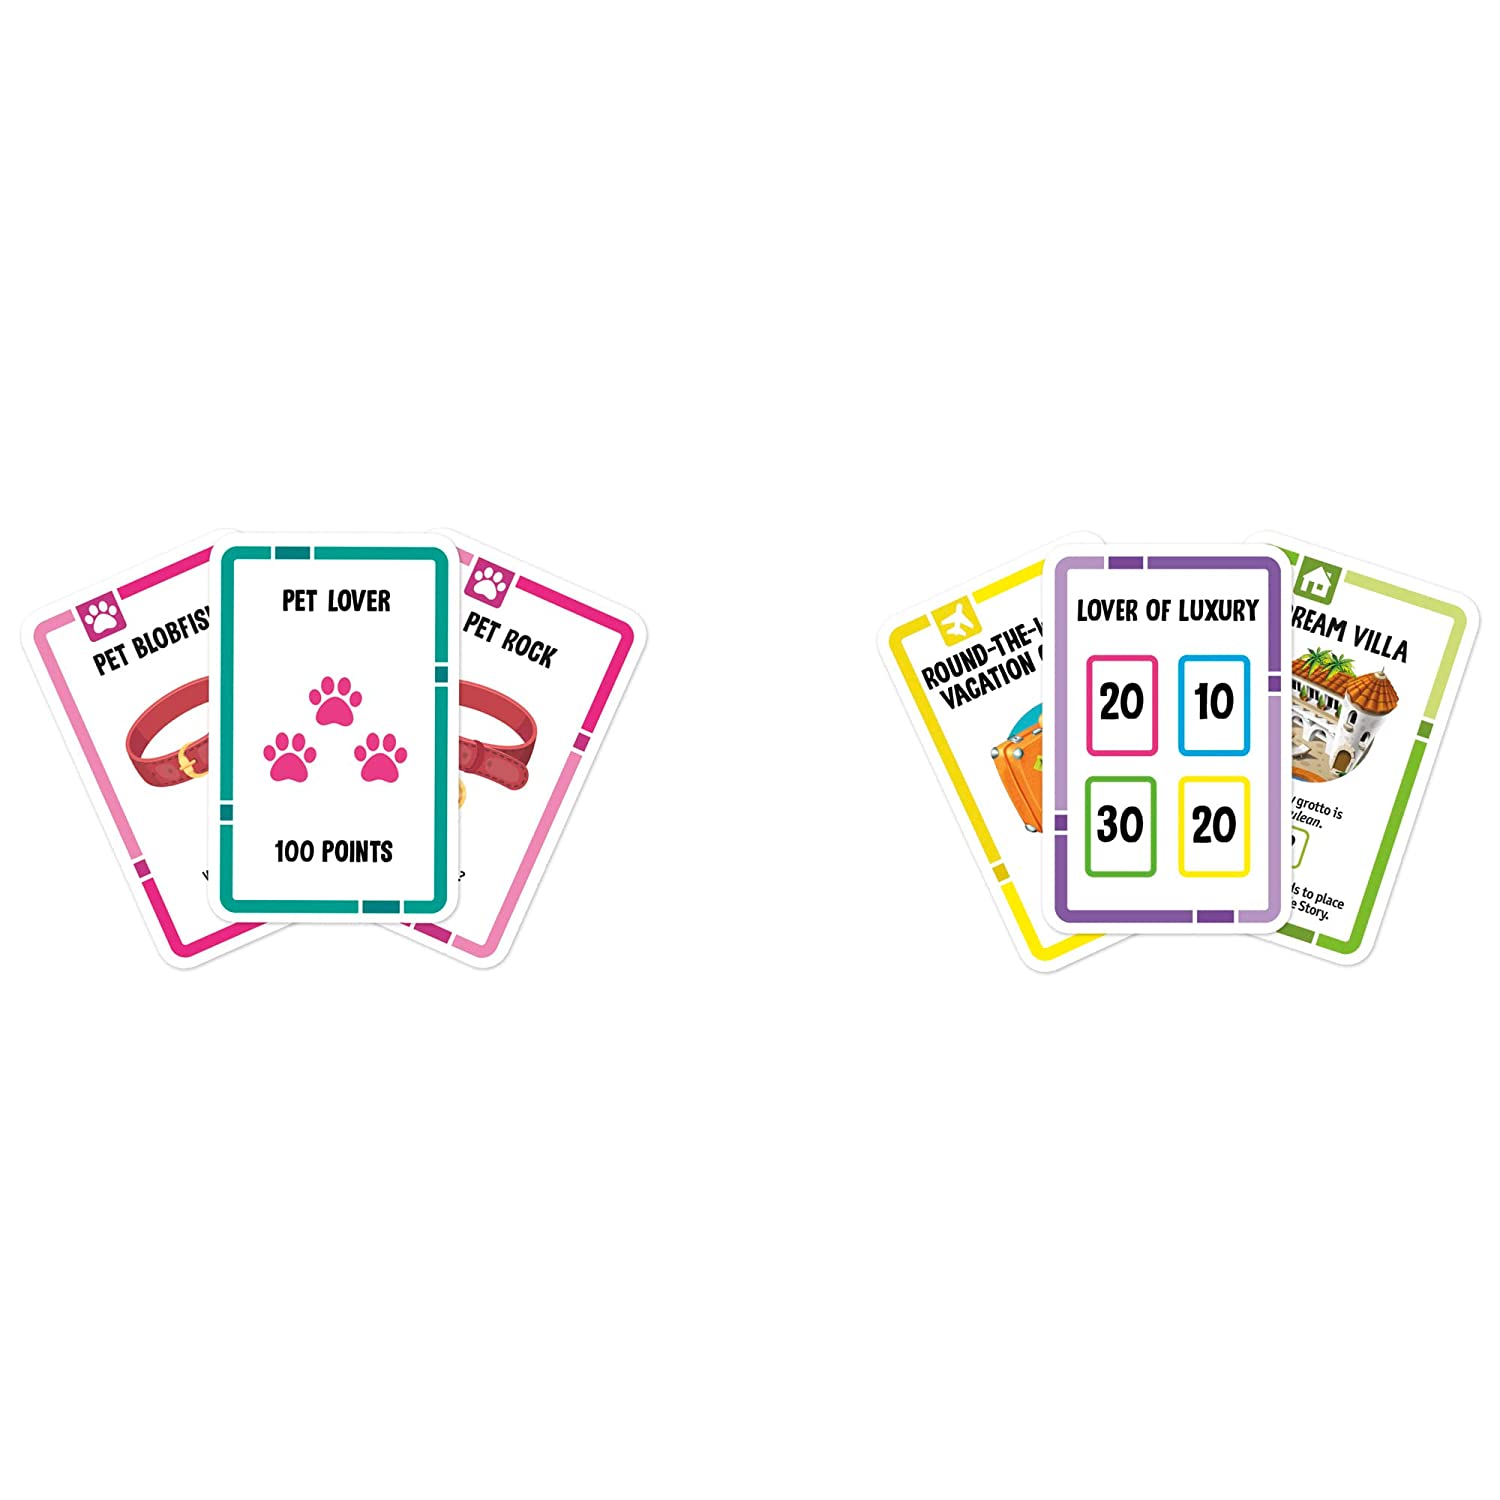 Hasbro Gaming The Game of Life Goals Card Game for Families and Kids Ages 8 and Up